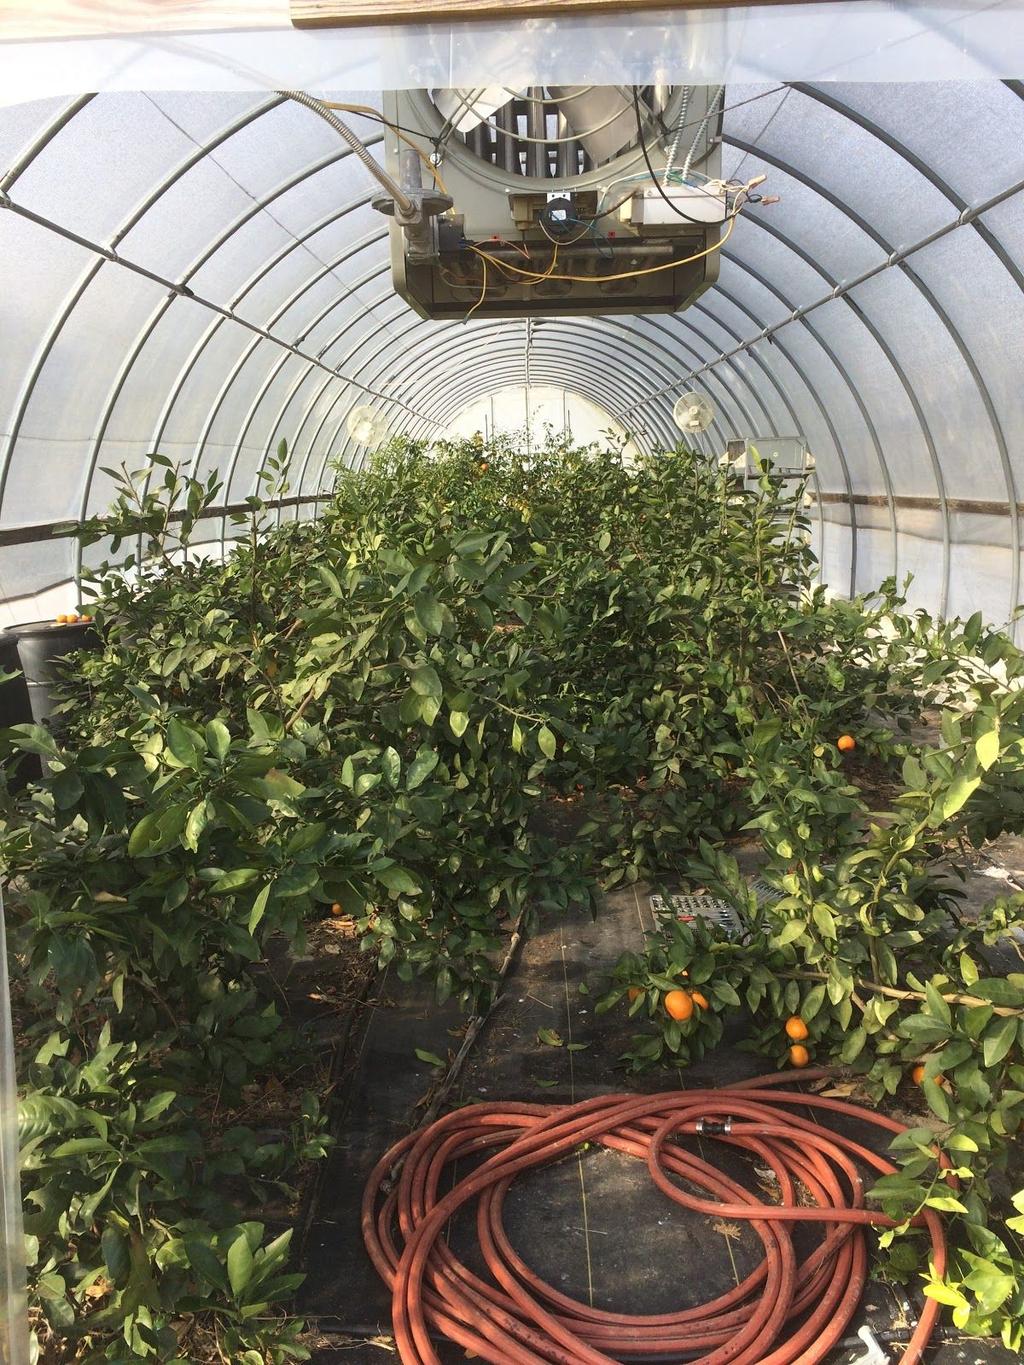 This is the citrus hoop house at Randle Farms in Auburn, Alabama.